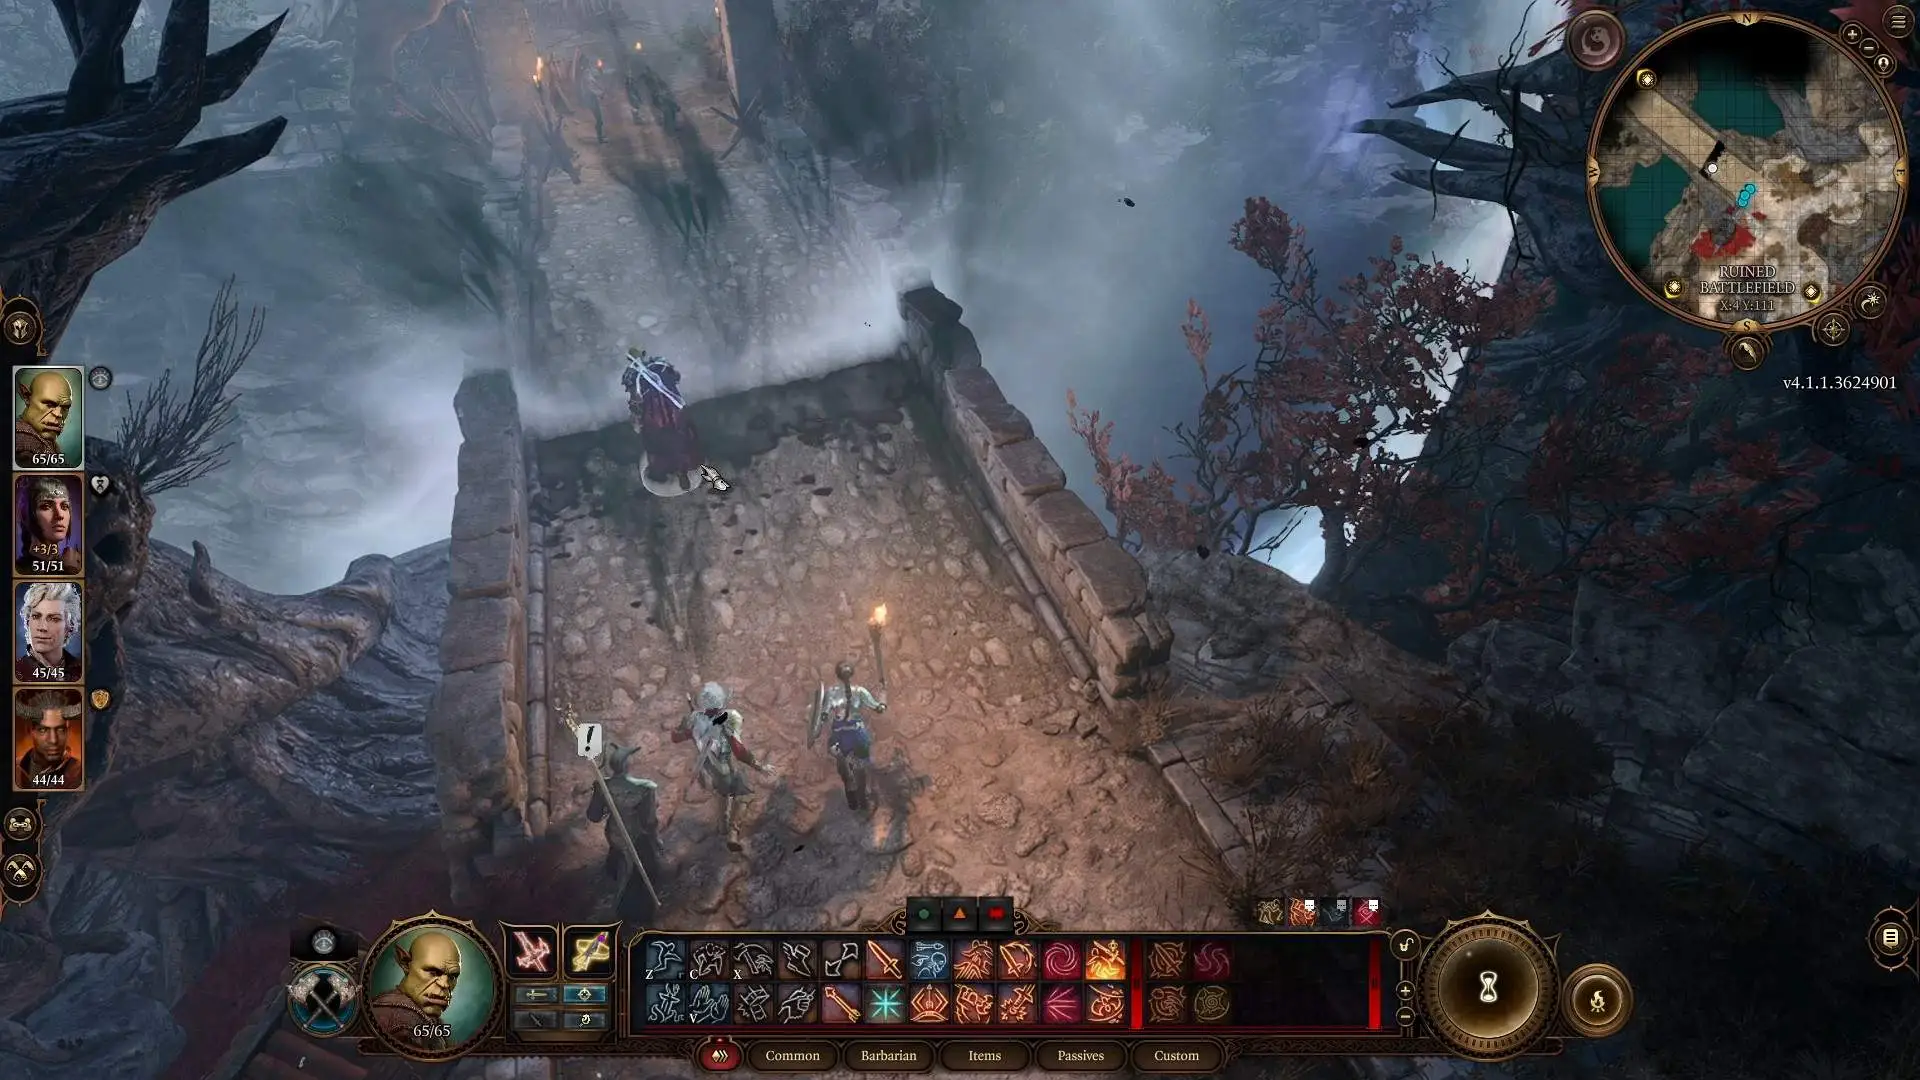 An image of the player character party attempting to cross a bridge leadint into the Last Light Inn in Baldur's Gate 3.